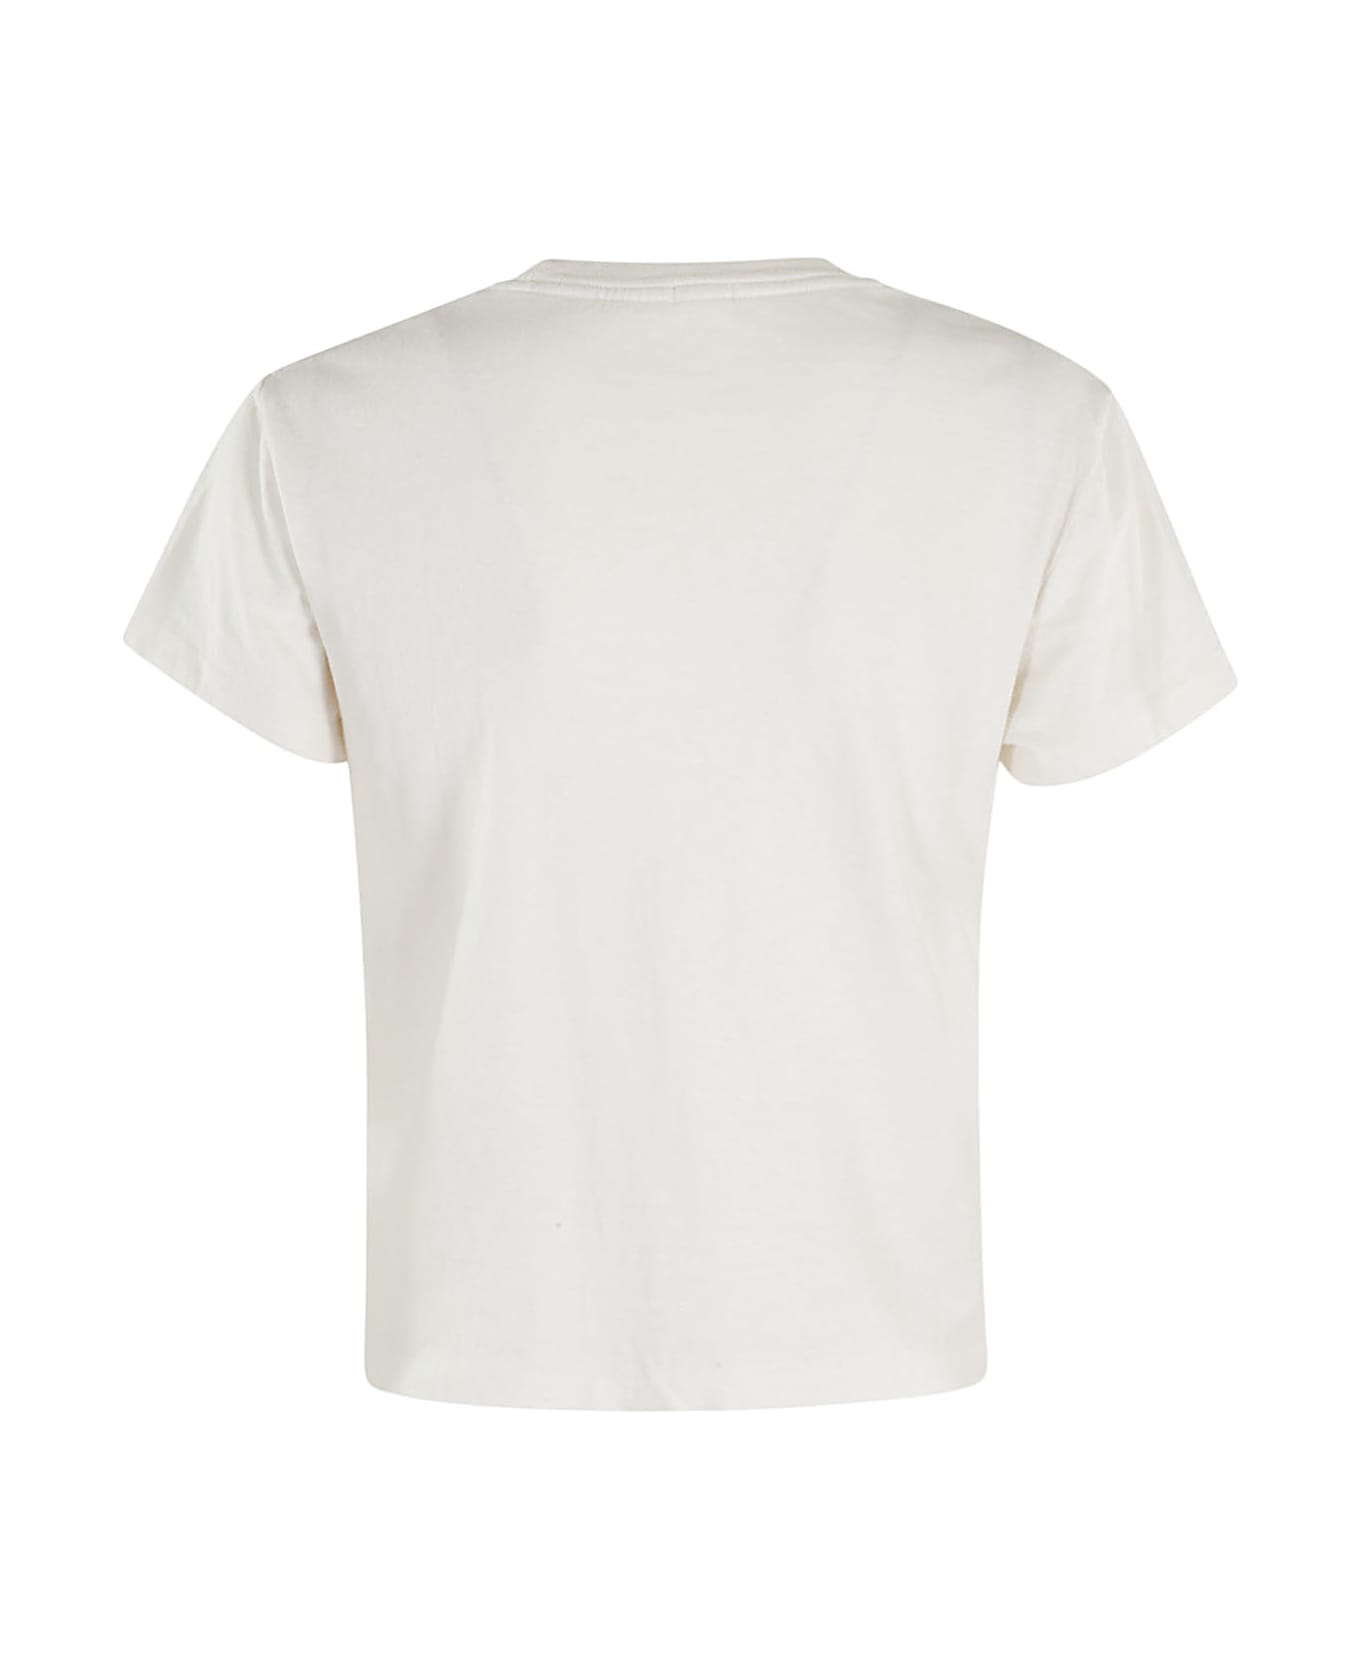 RE/DONE Classic Tee Whats Happening - Vintage White